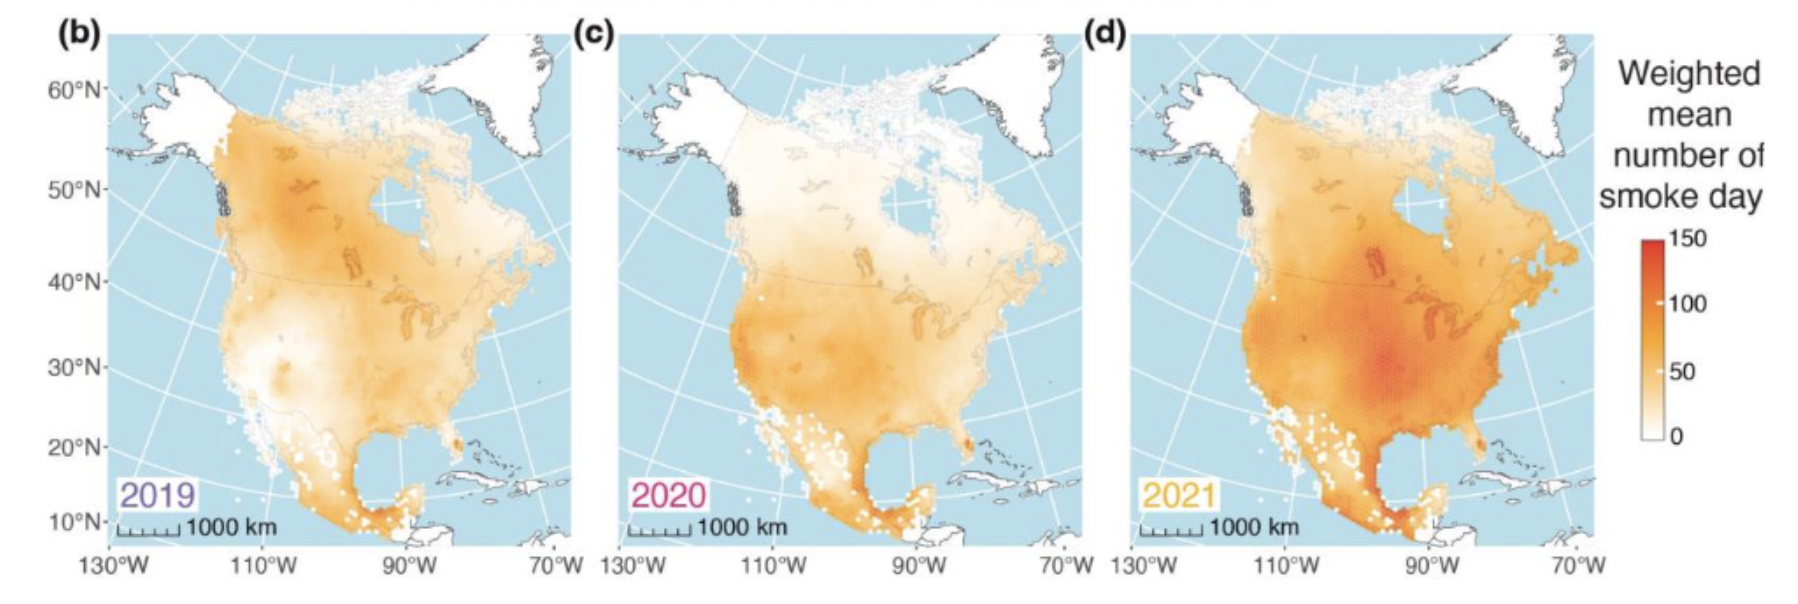 Figure of three maps of North America showing the number of smoke days for 2019, 2020 and 2021 represented in orange